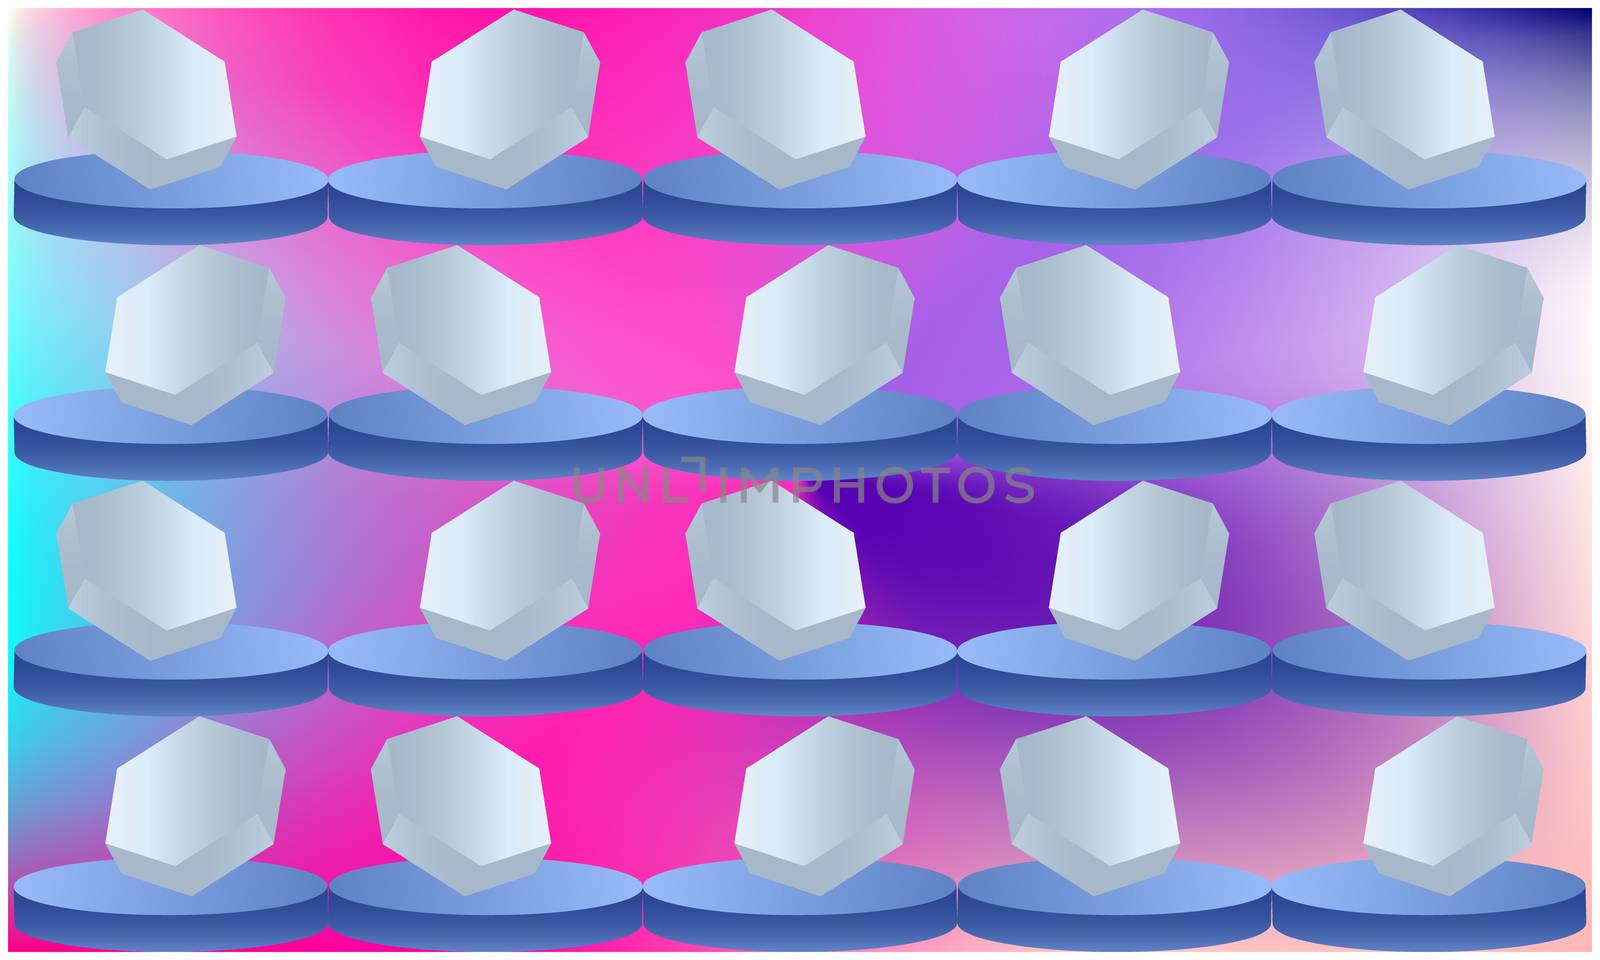 digital textile design of hexagon pattern on abstract background